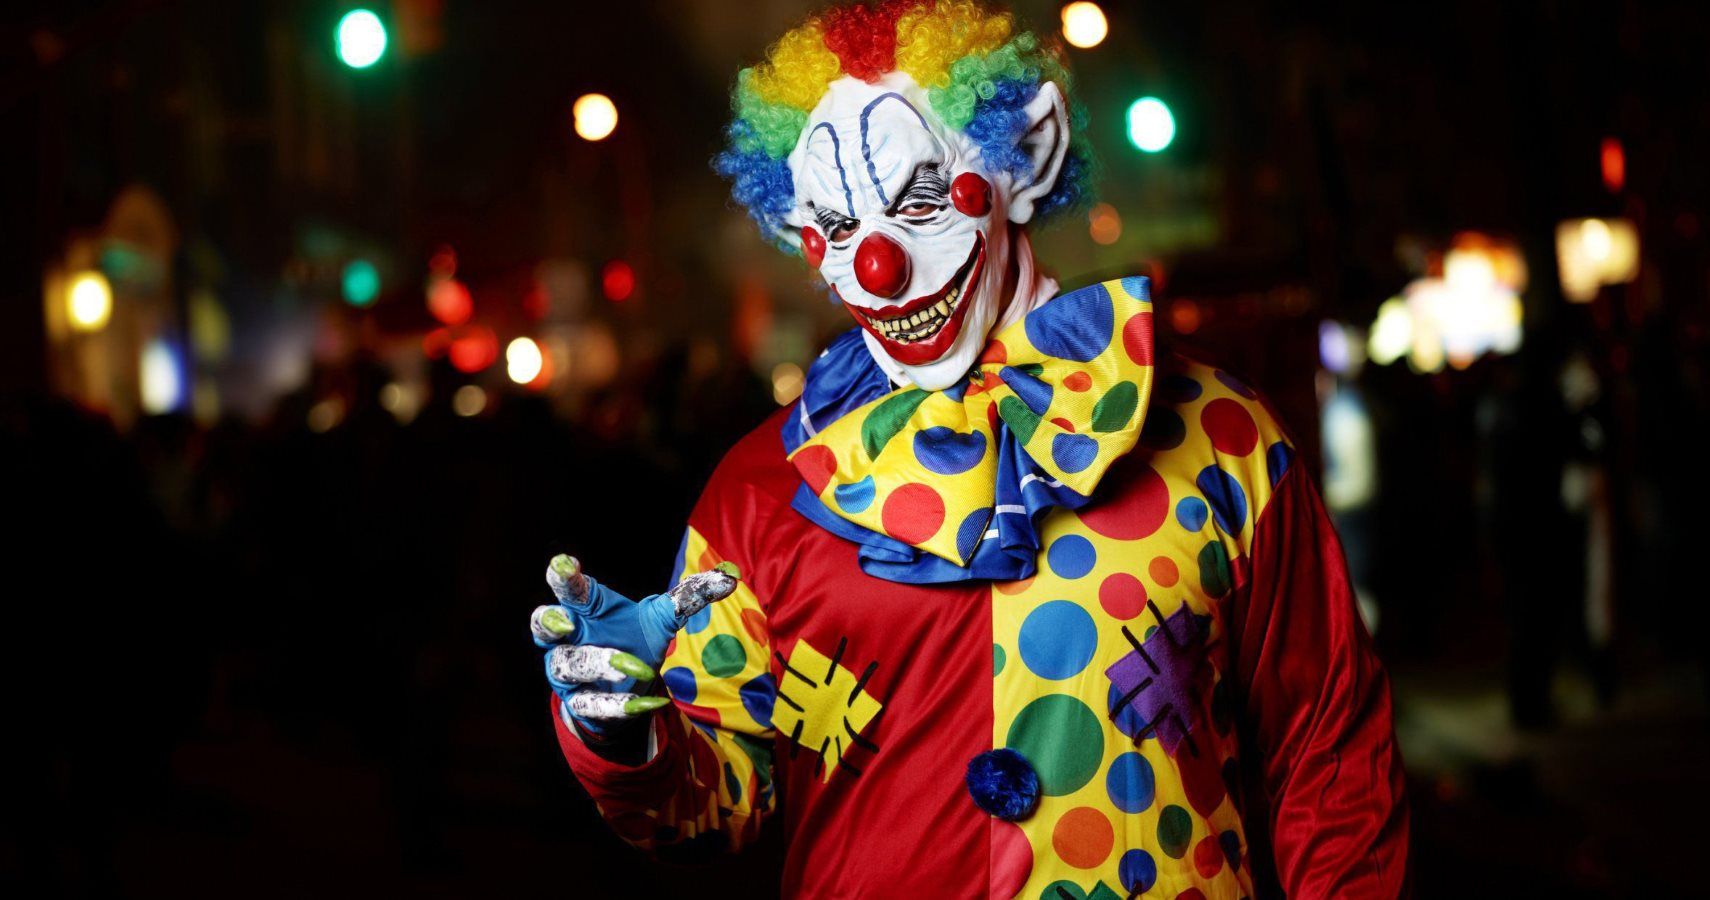 Creepy Clowns Are Back Authorities Inform Worried Citizens Of How To